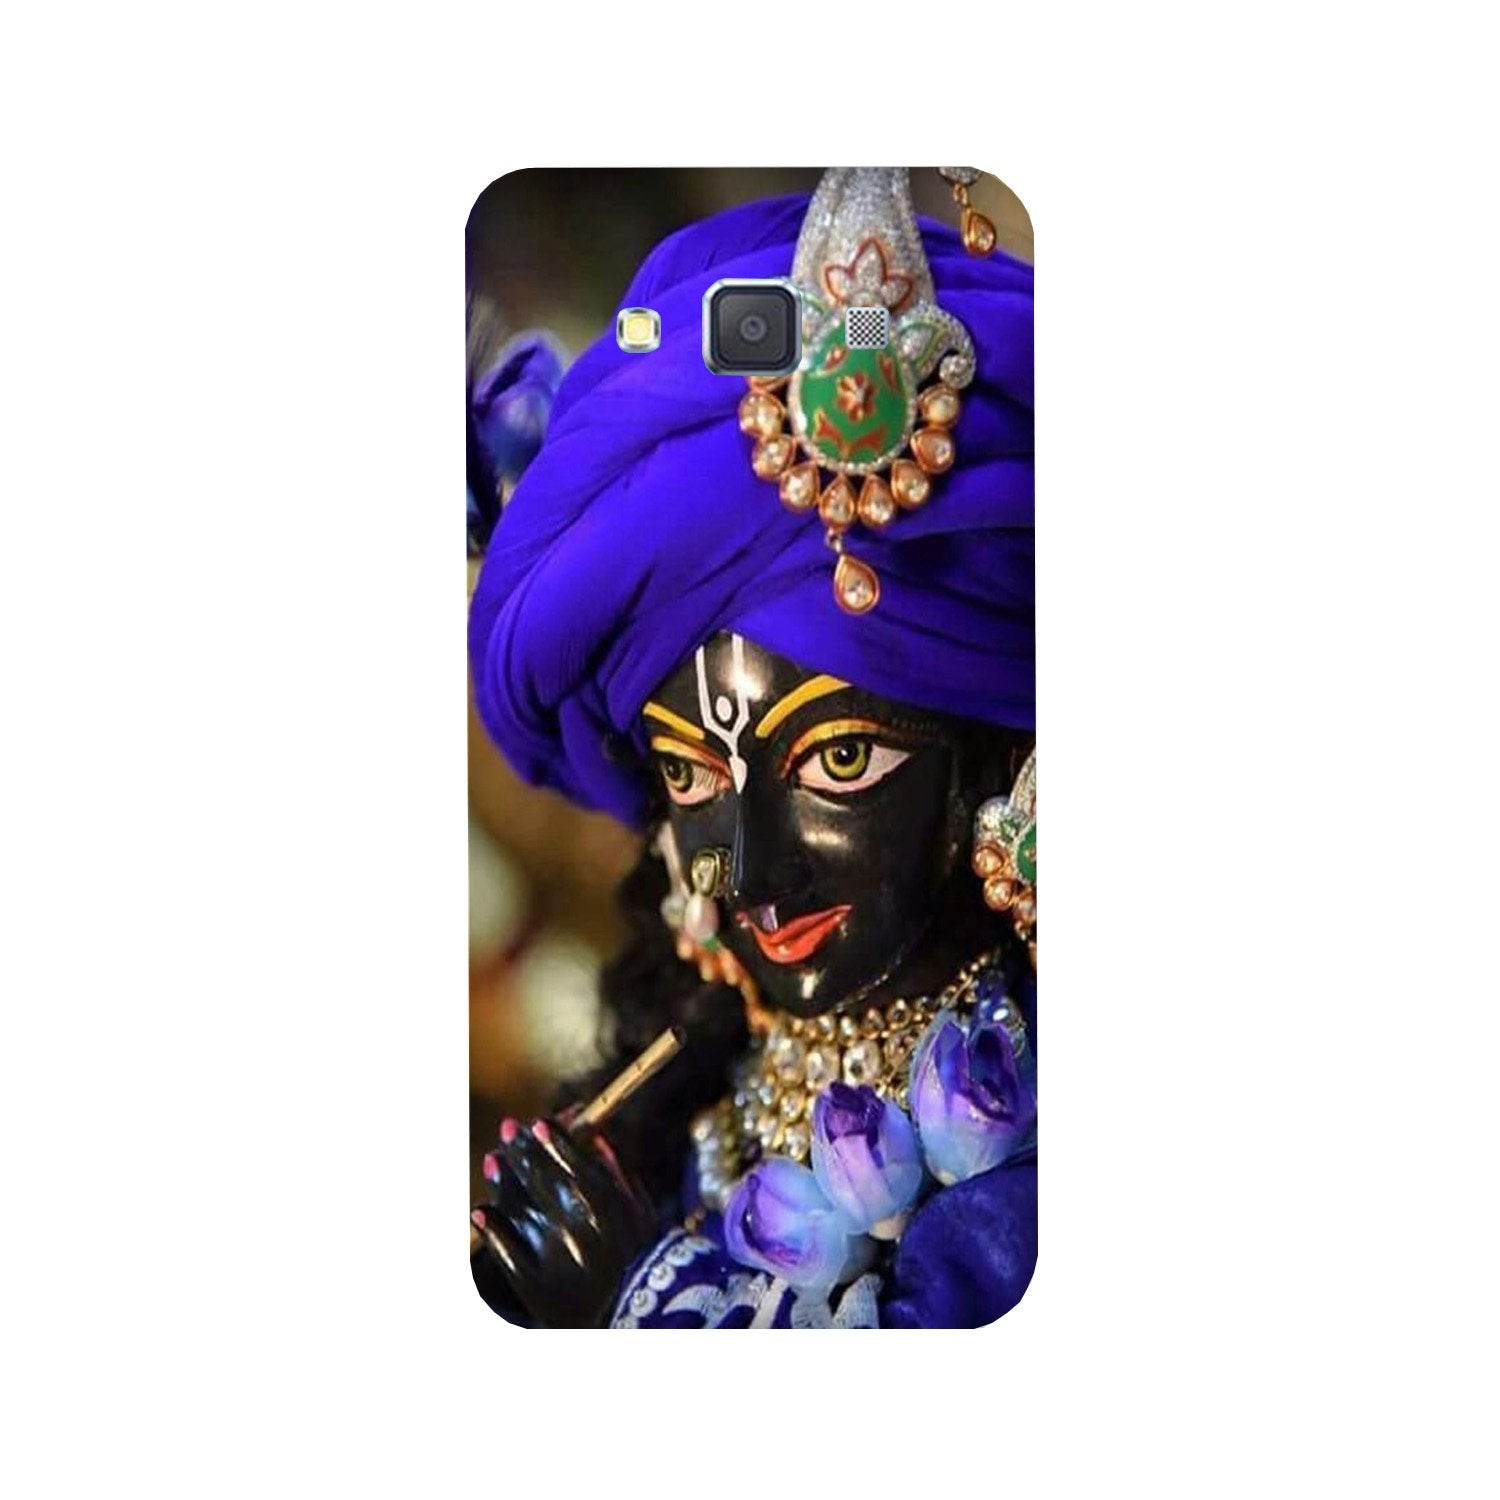 Lord Krishna4 Case for Galaxy ON5/ON5 Pro